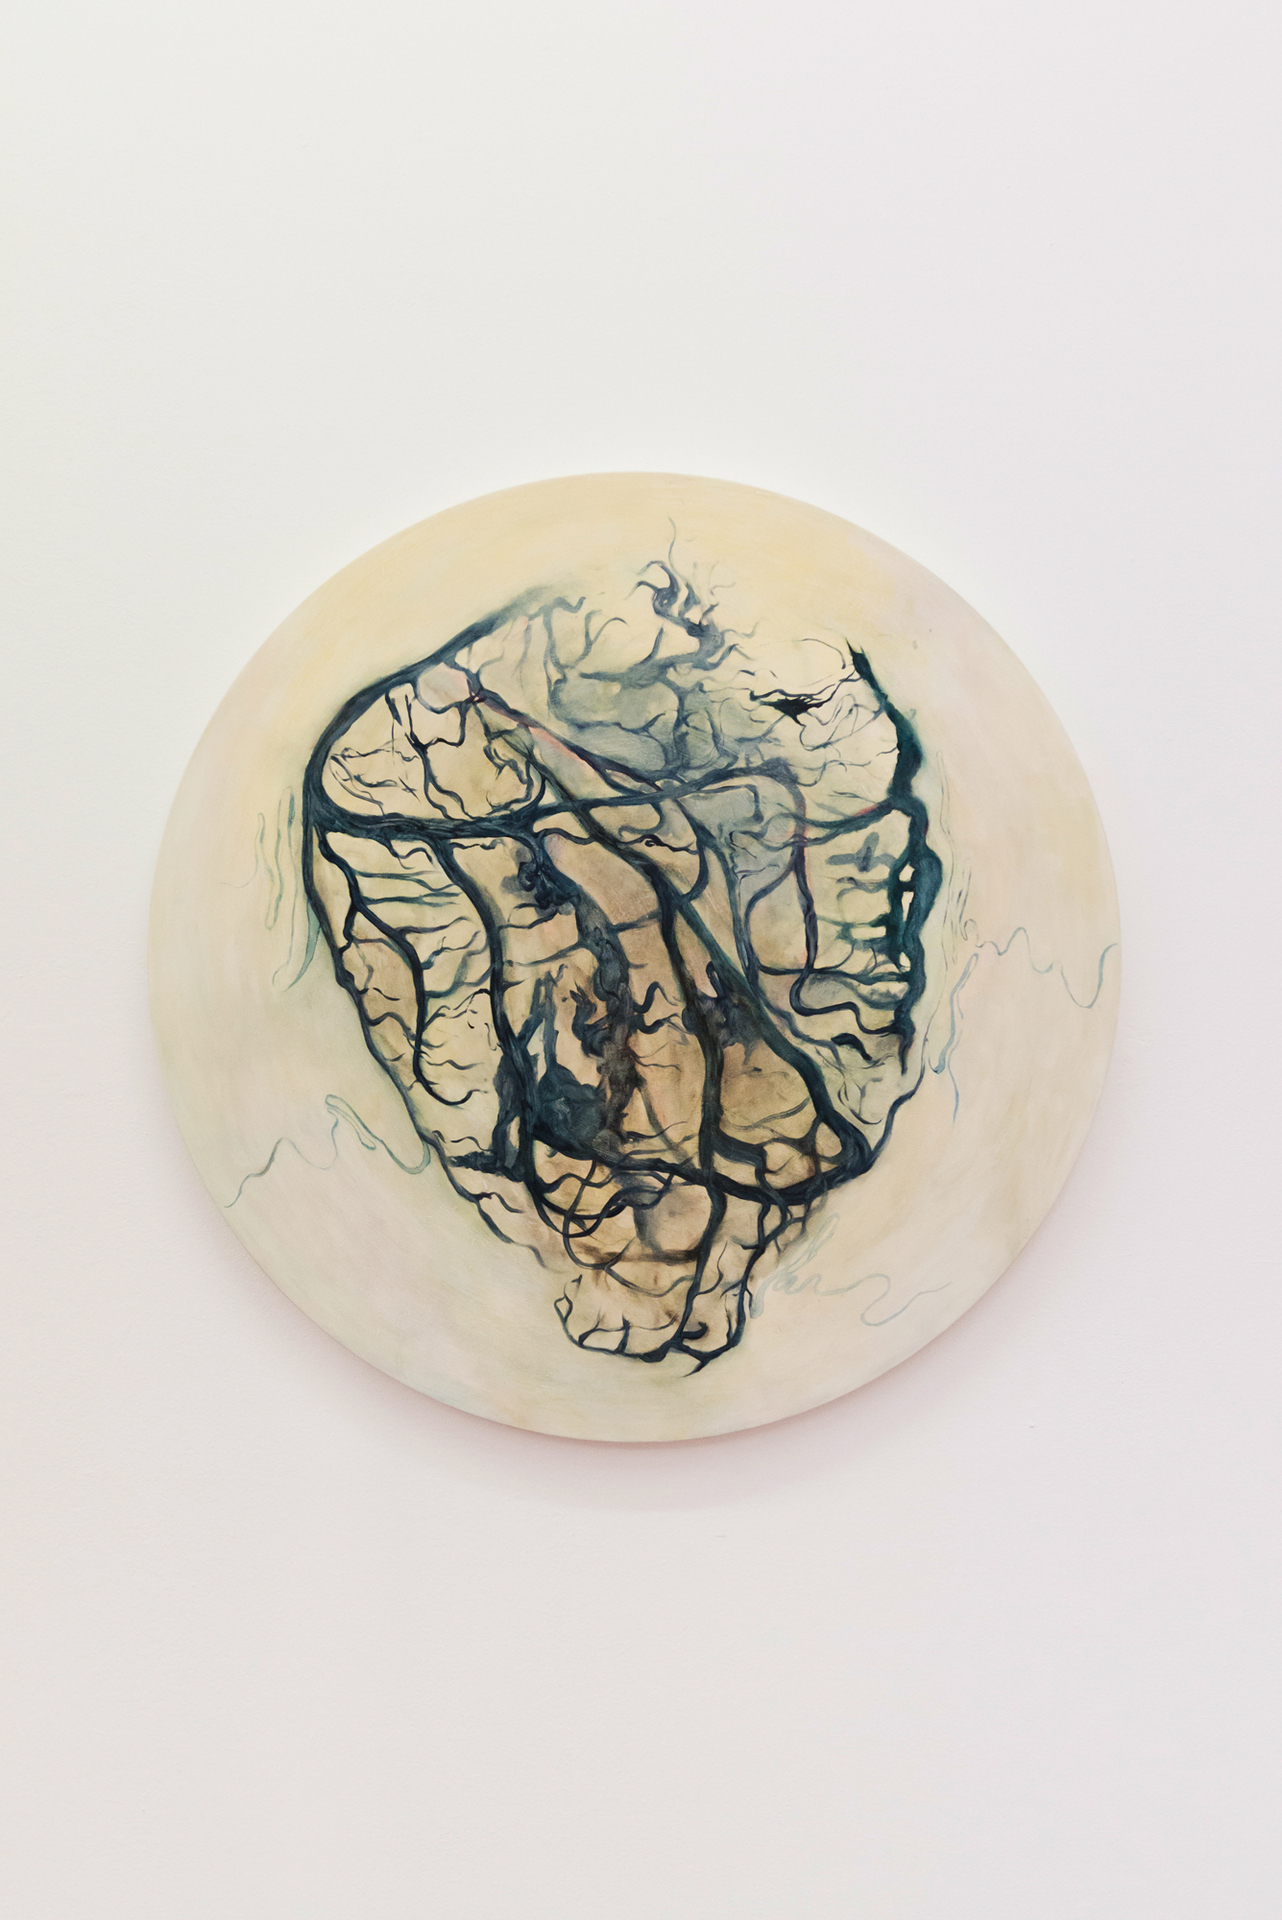 Leda Bourgogne, The Emptiness Of My Heart Fills Me With Infinity, 2021, Acrylic, oil on wood, 79 cm diameter, 3,8 cm height